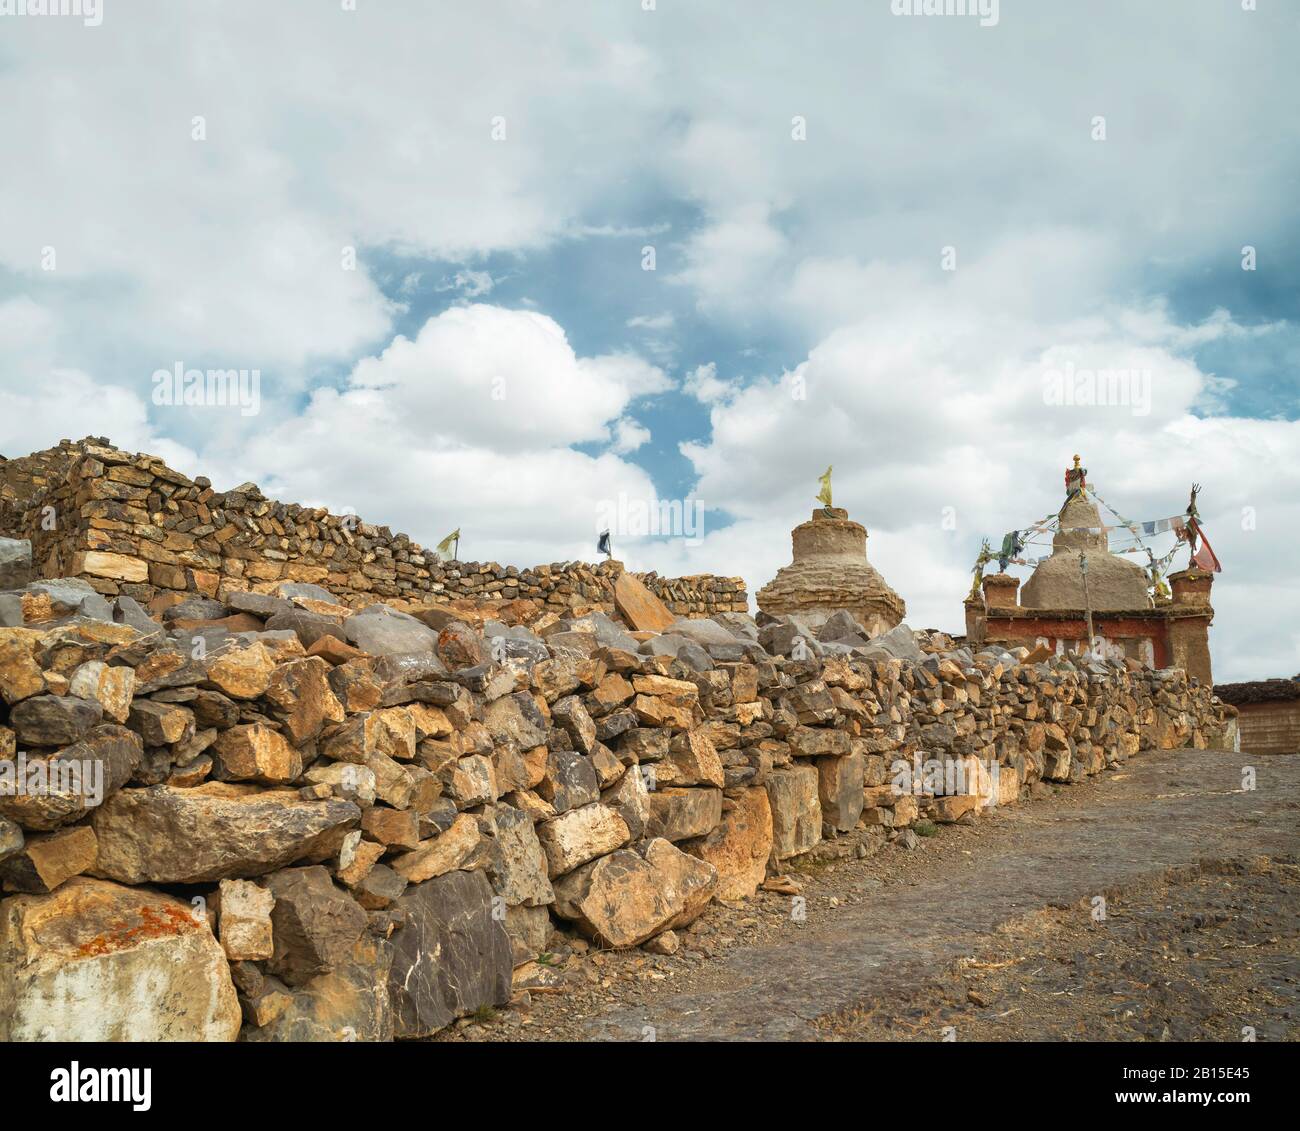 Traditional dry stone wall culminating in Buddhist gompa and chorten under clouded blue sky in Himalayan village of Tashigong, Himachal Pradesh, India. Stock Photo